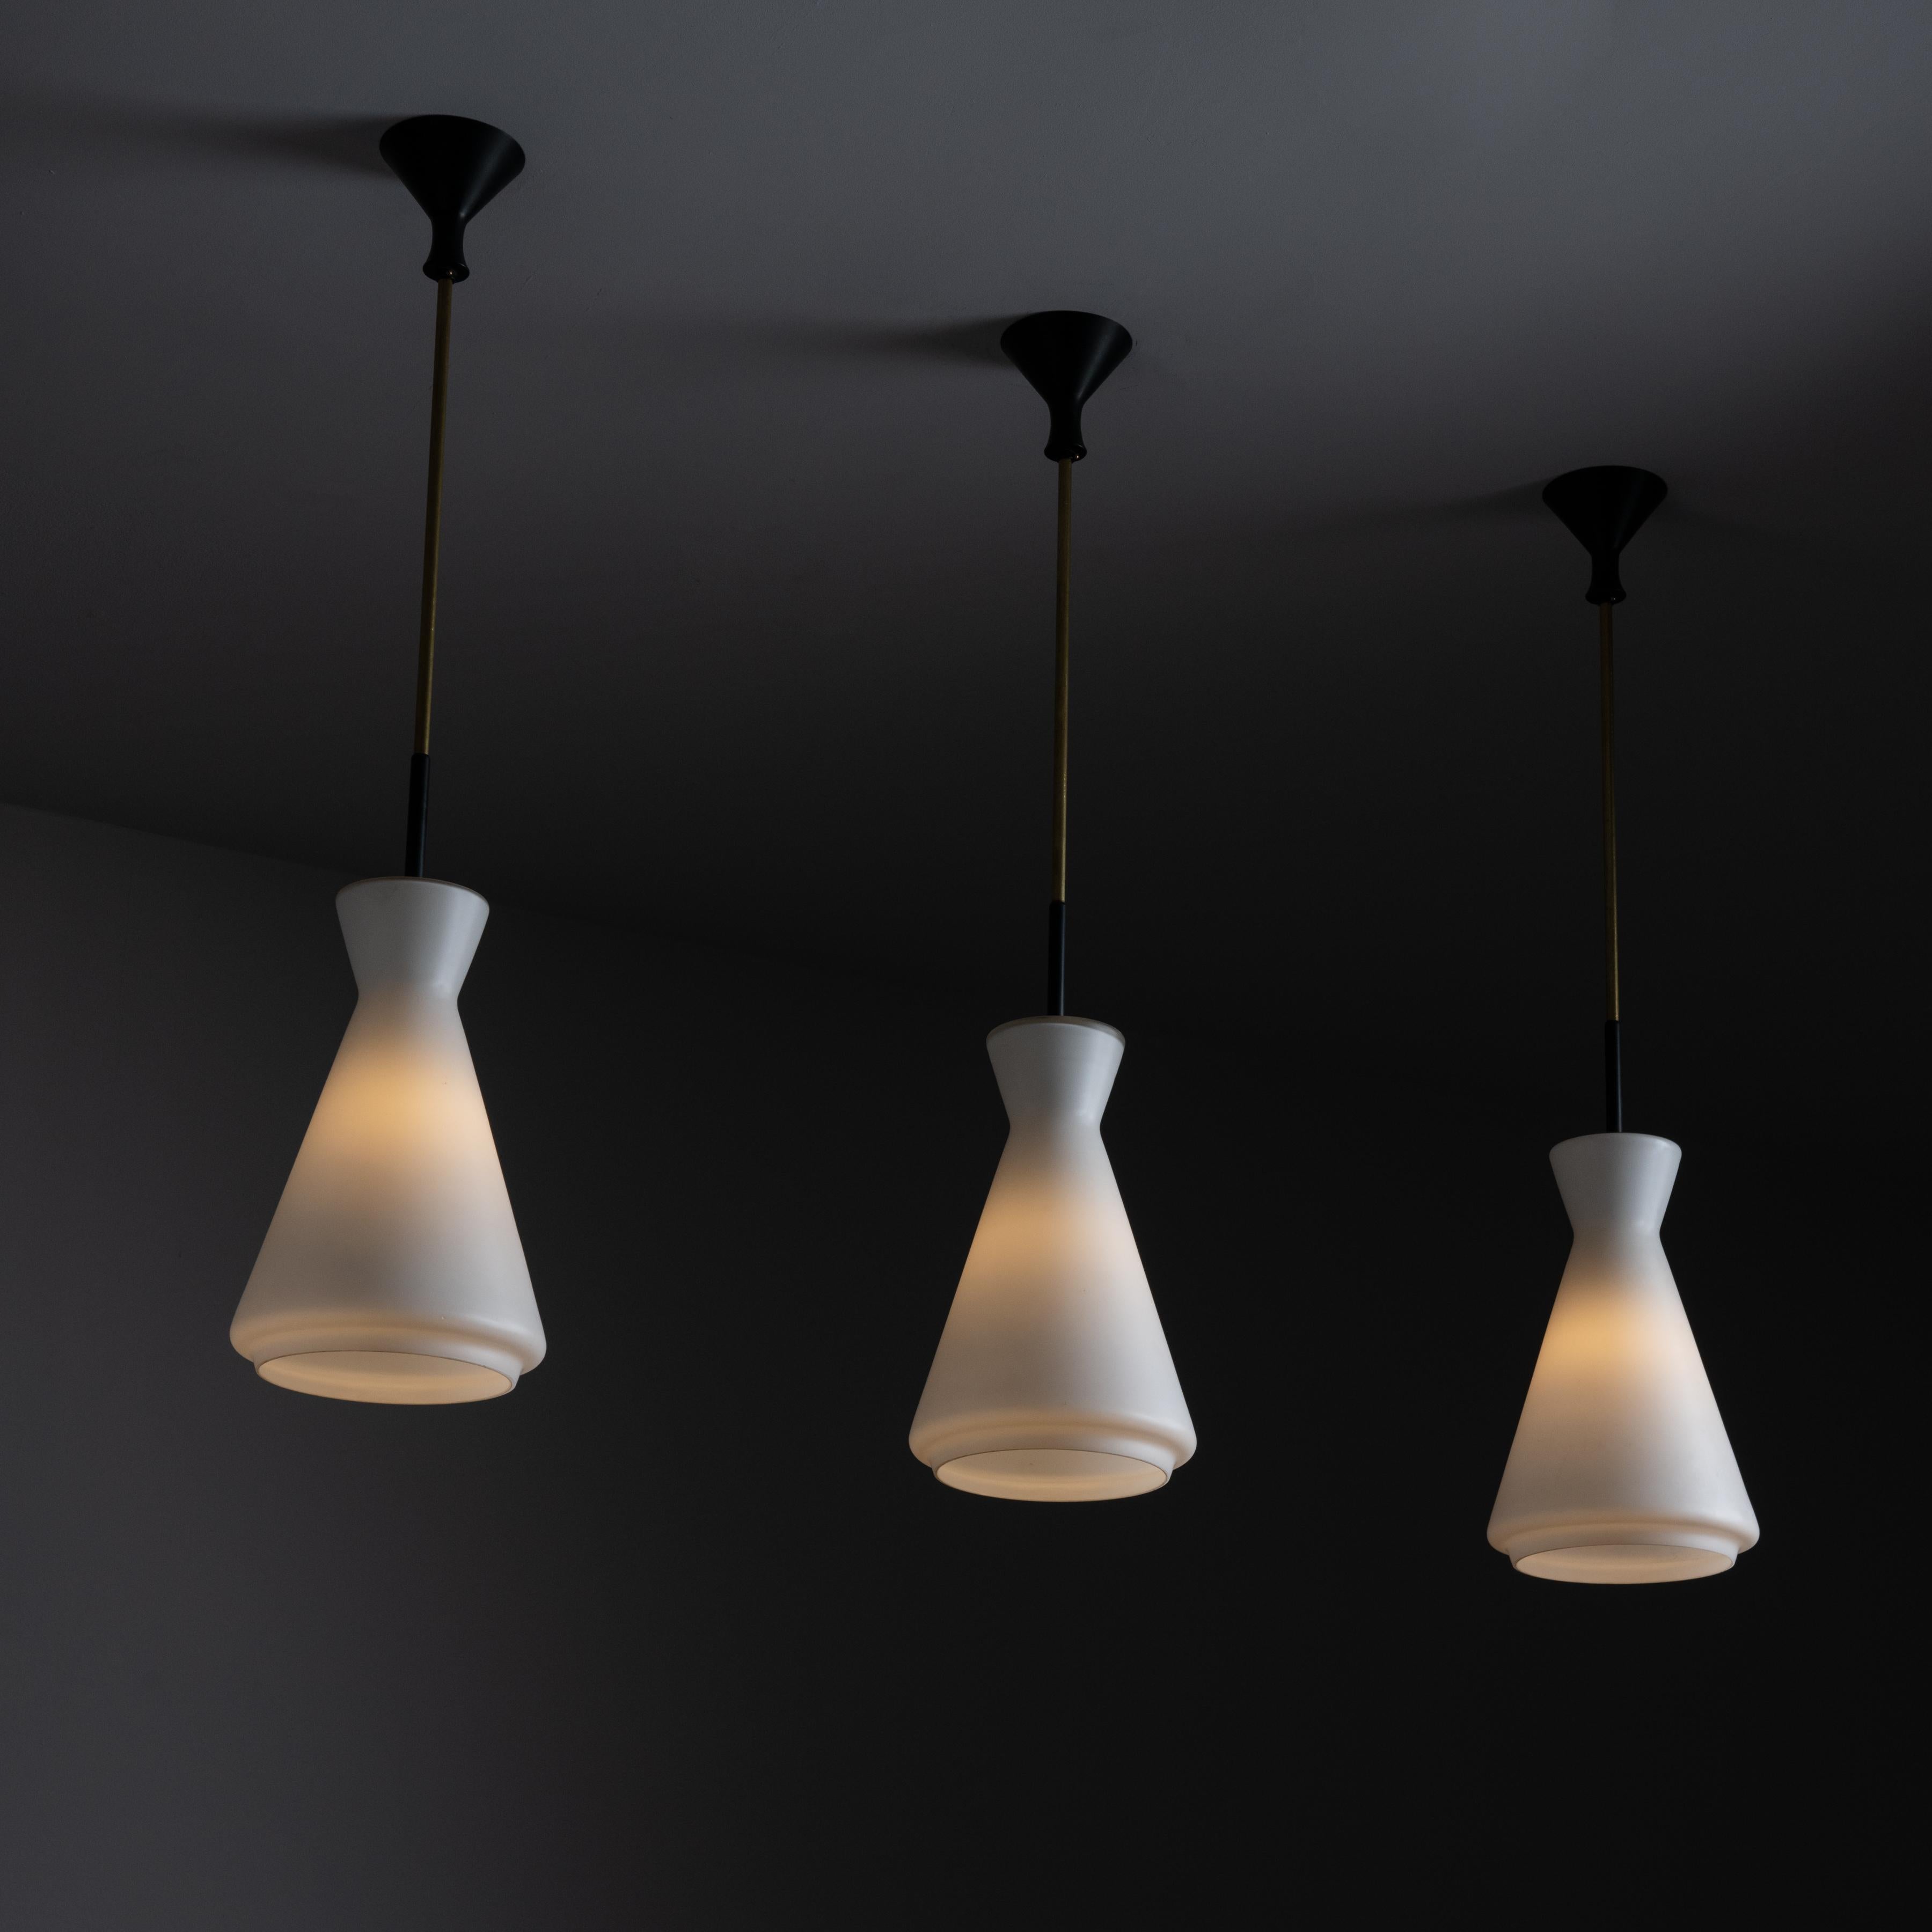 Ceiling lights by Stilnovo. Designed and manufactured in Italy circa the 1960s. Structural pillar like pendant consisting of opal glass on a minimal enameled black and brass stem. Holds one E27 socket type, adapted for the US. We recommend one 60w